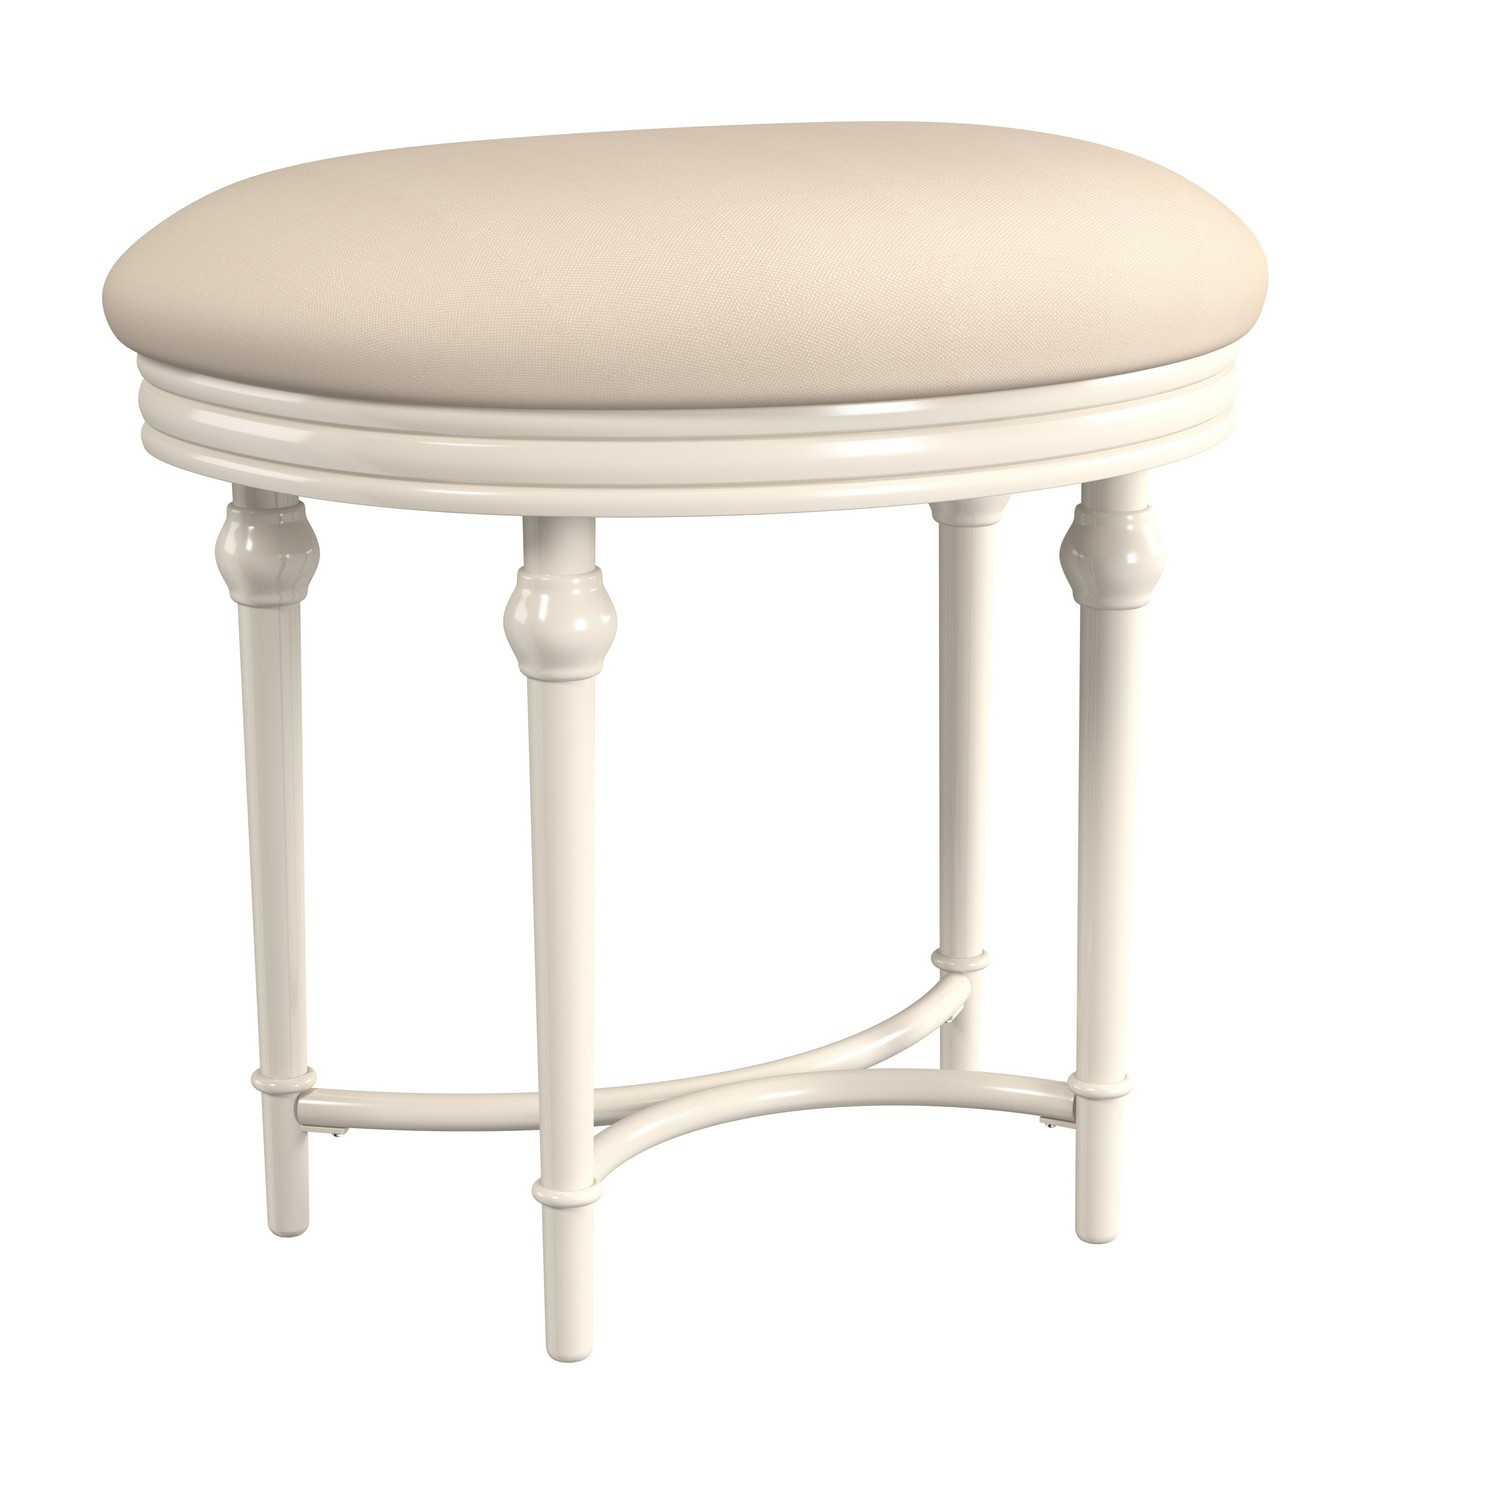 Hillsdale Cape May Backless Metal Vanity Stool - Matte White